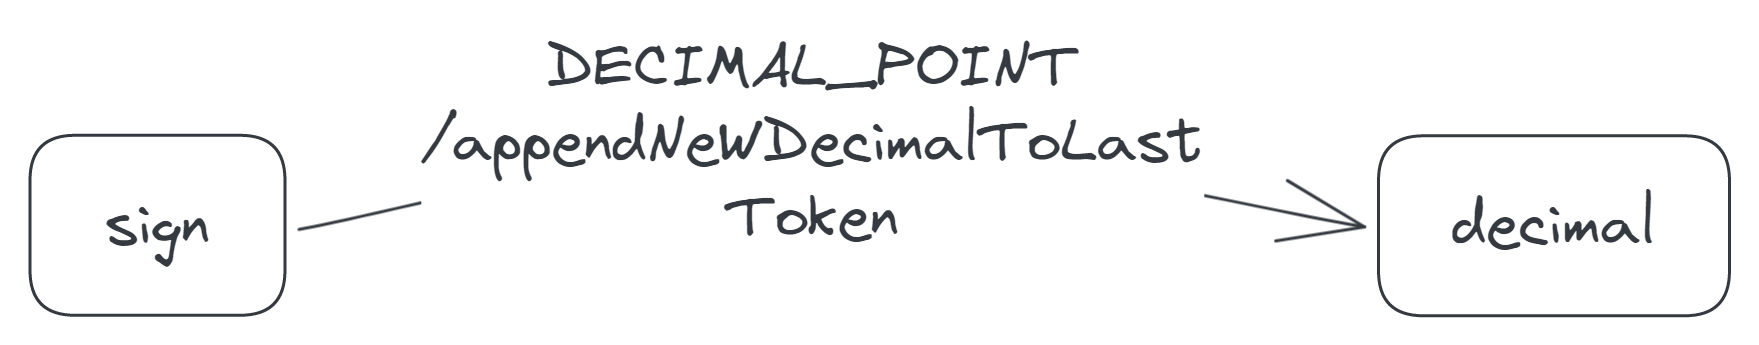 A transition labelled 'DECIMAL_POINT/appendNewDecimalToLastToken', from the sign to the decimal state.